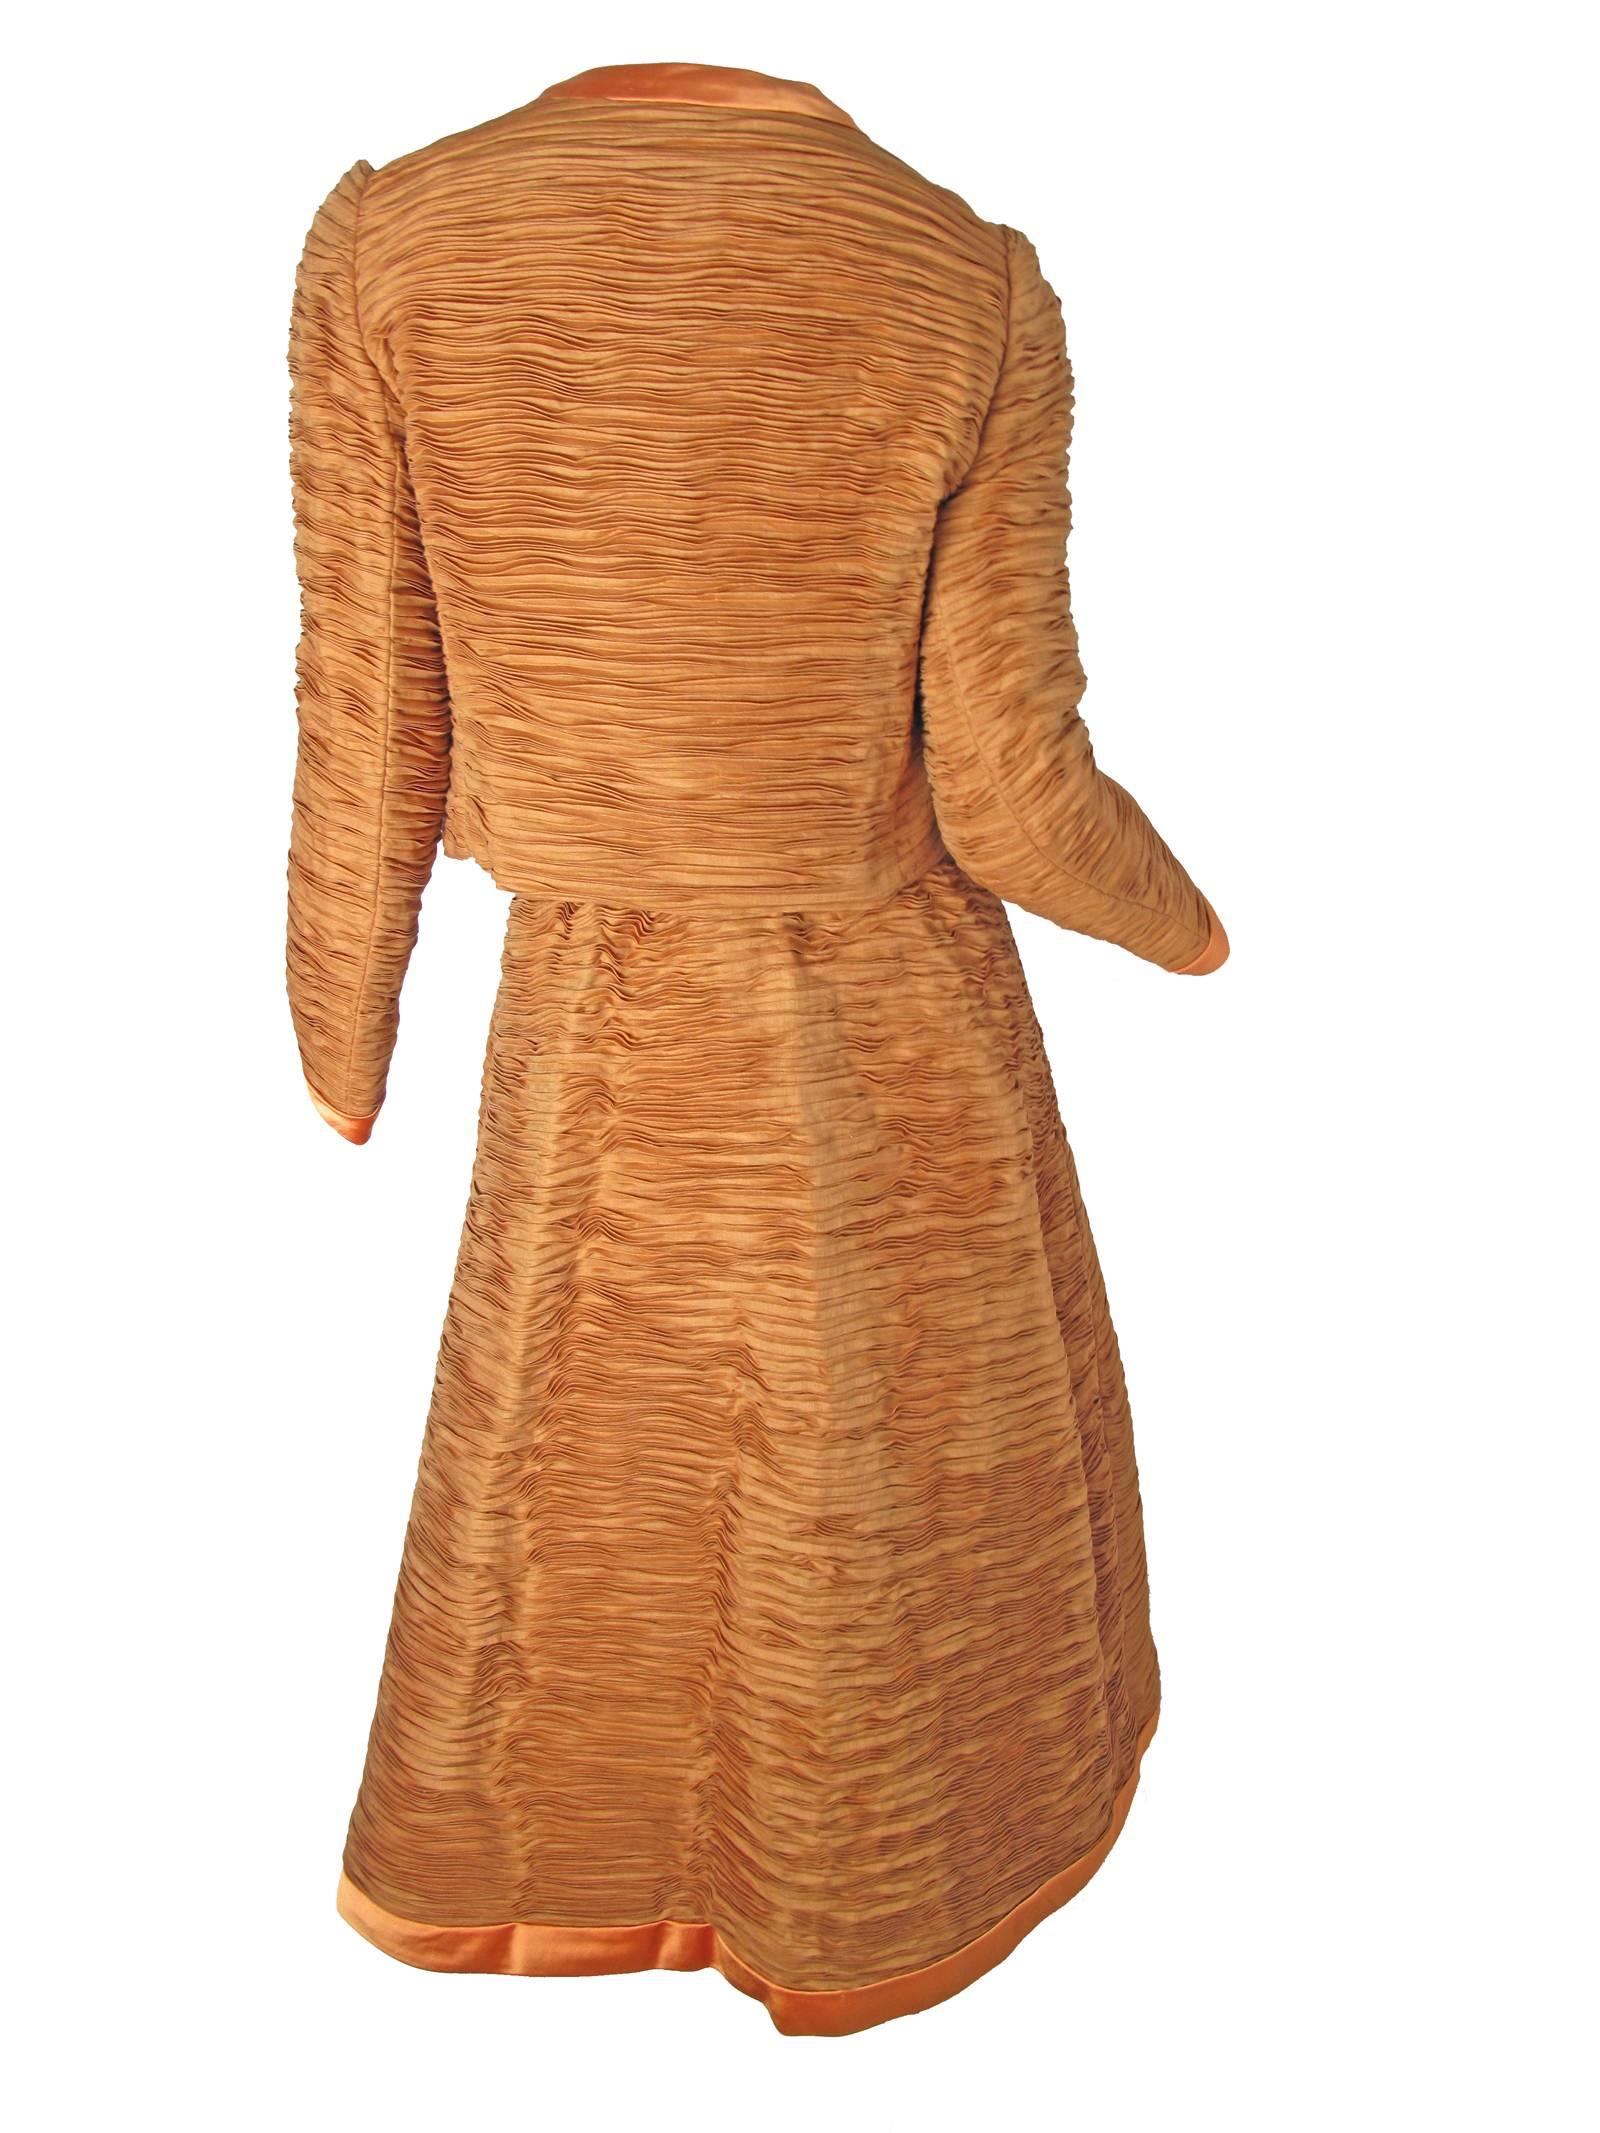 Sybil Connolly Irish Linen Pleated Suit, 1960s  In Excellent Condition For Sale In Austin, TX